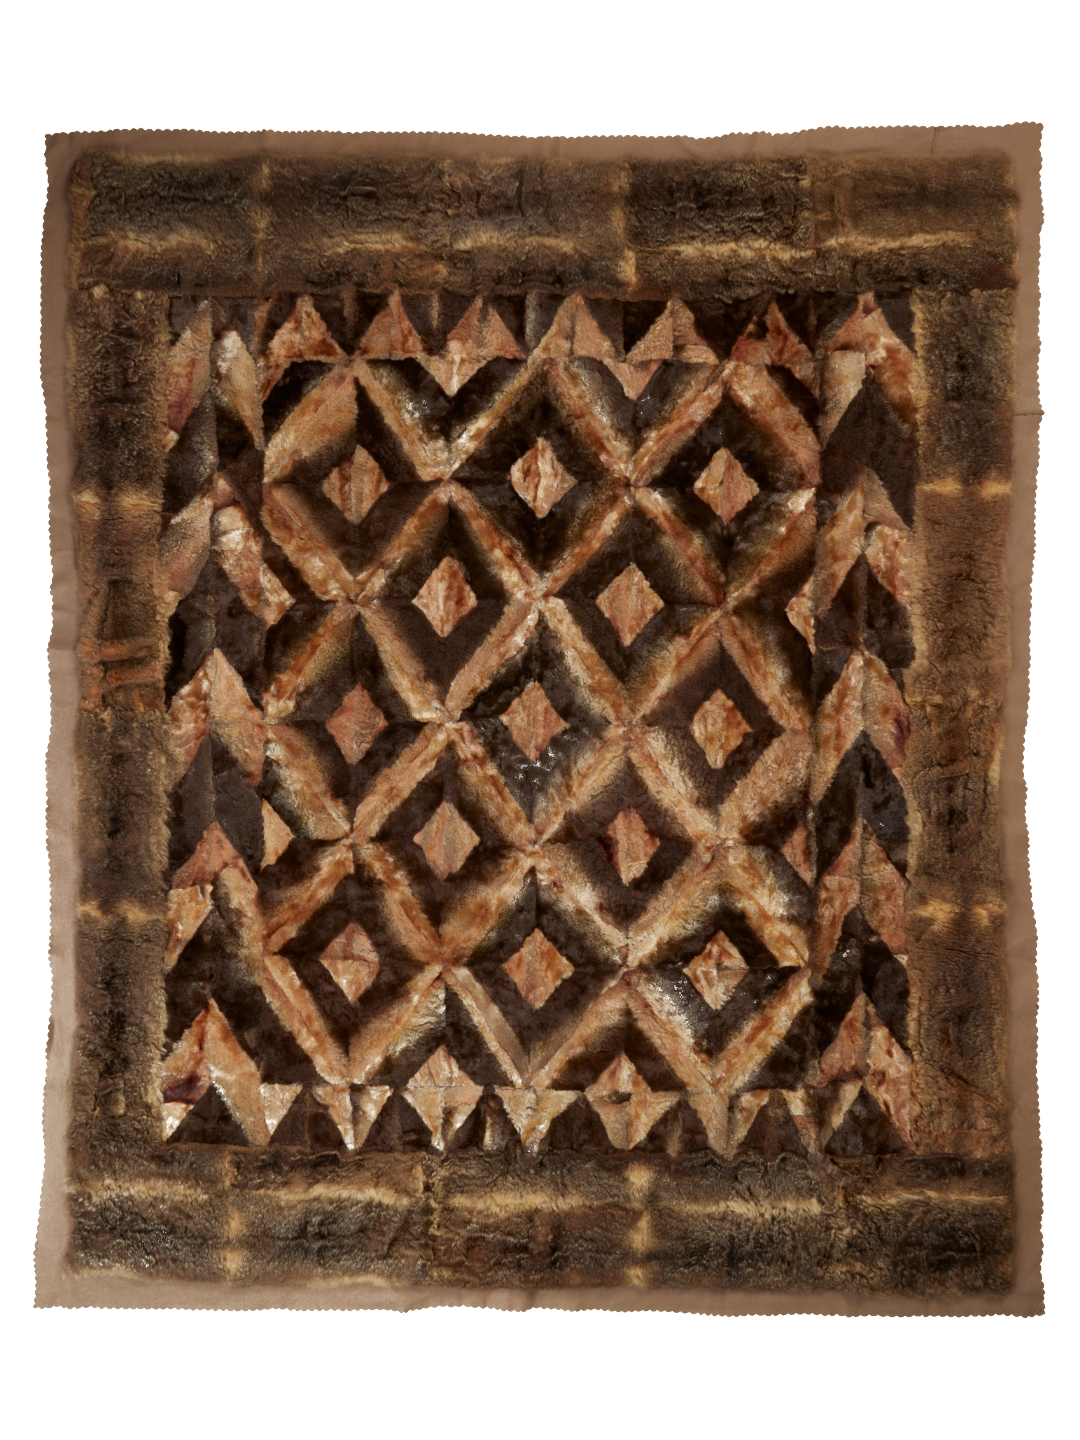 A platypus skin rug made into a diamond pattern with brown possum skin and fawn felt border.